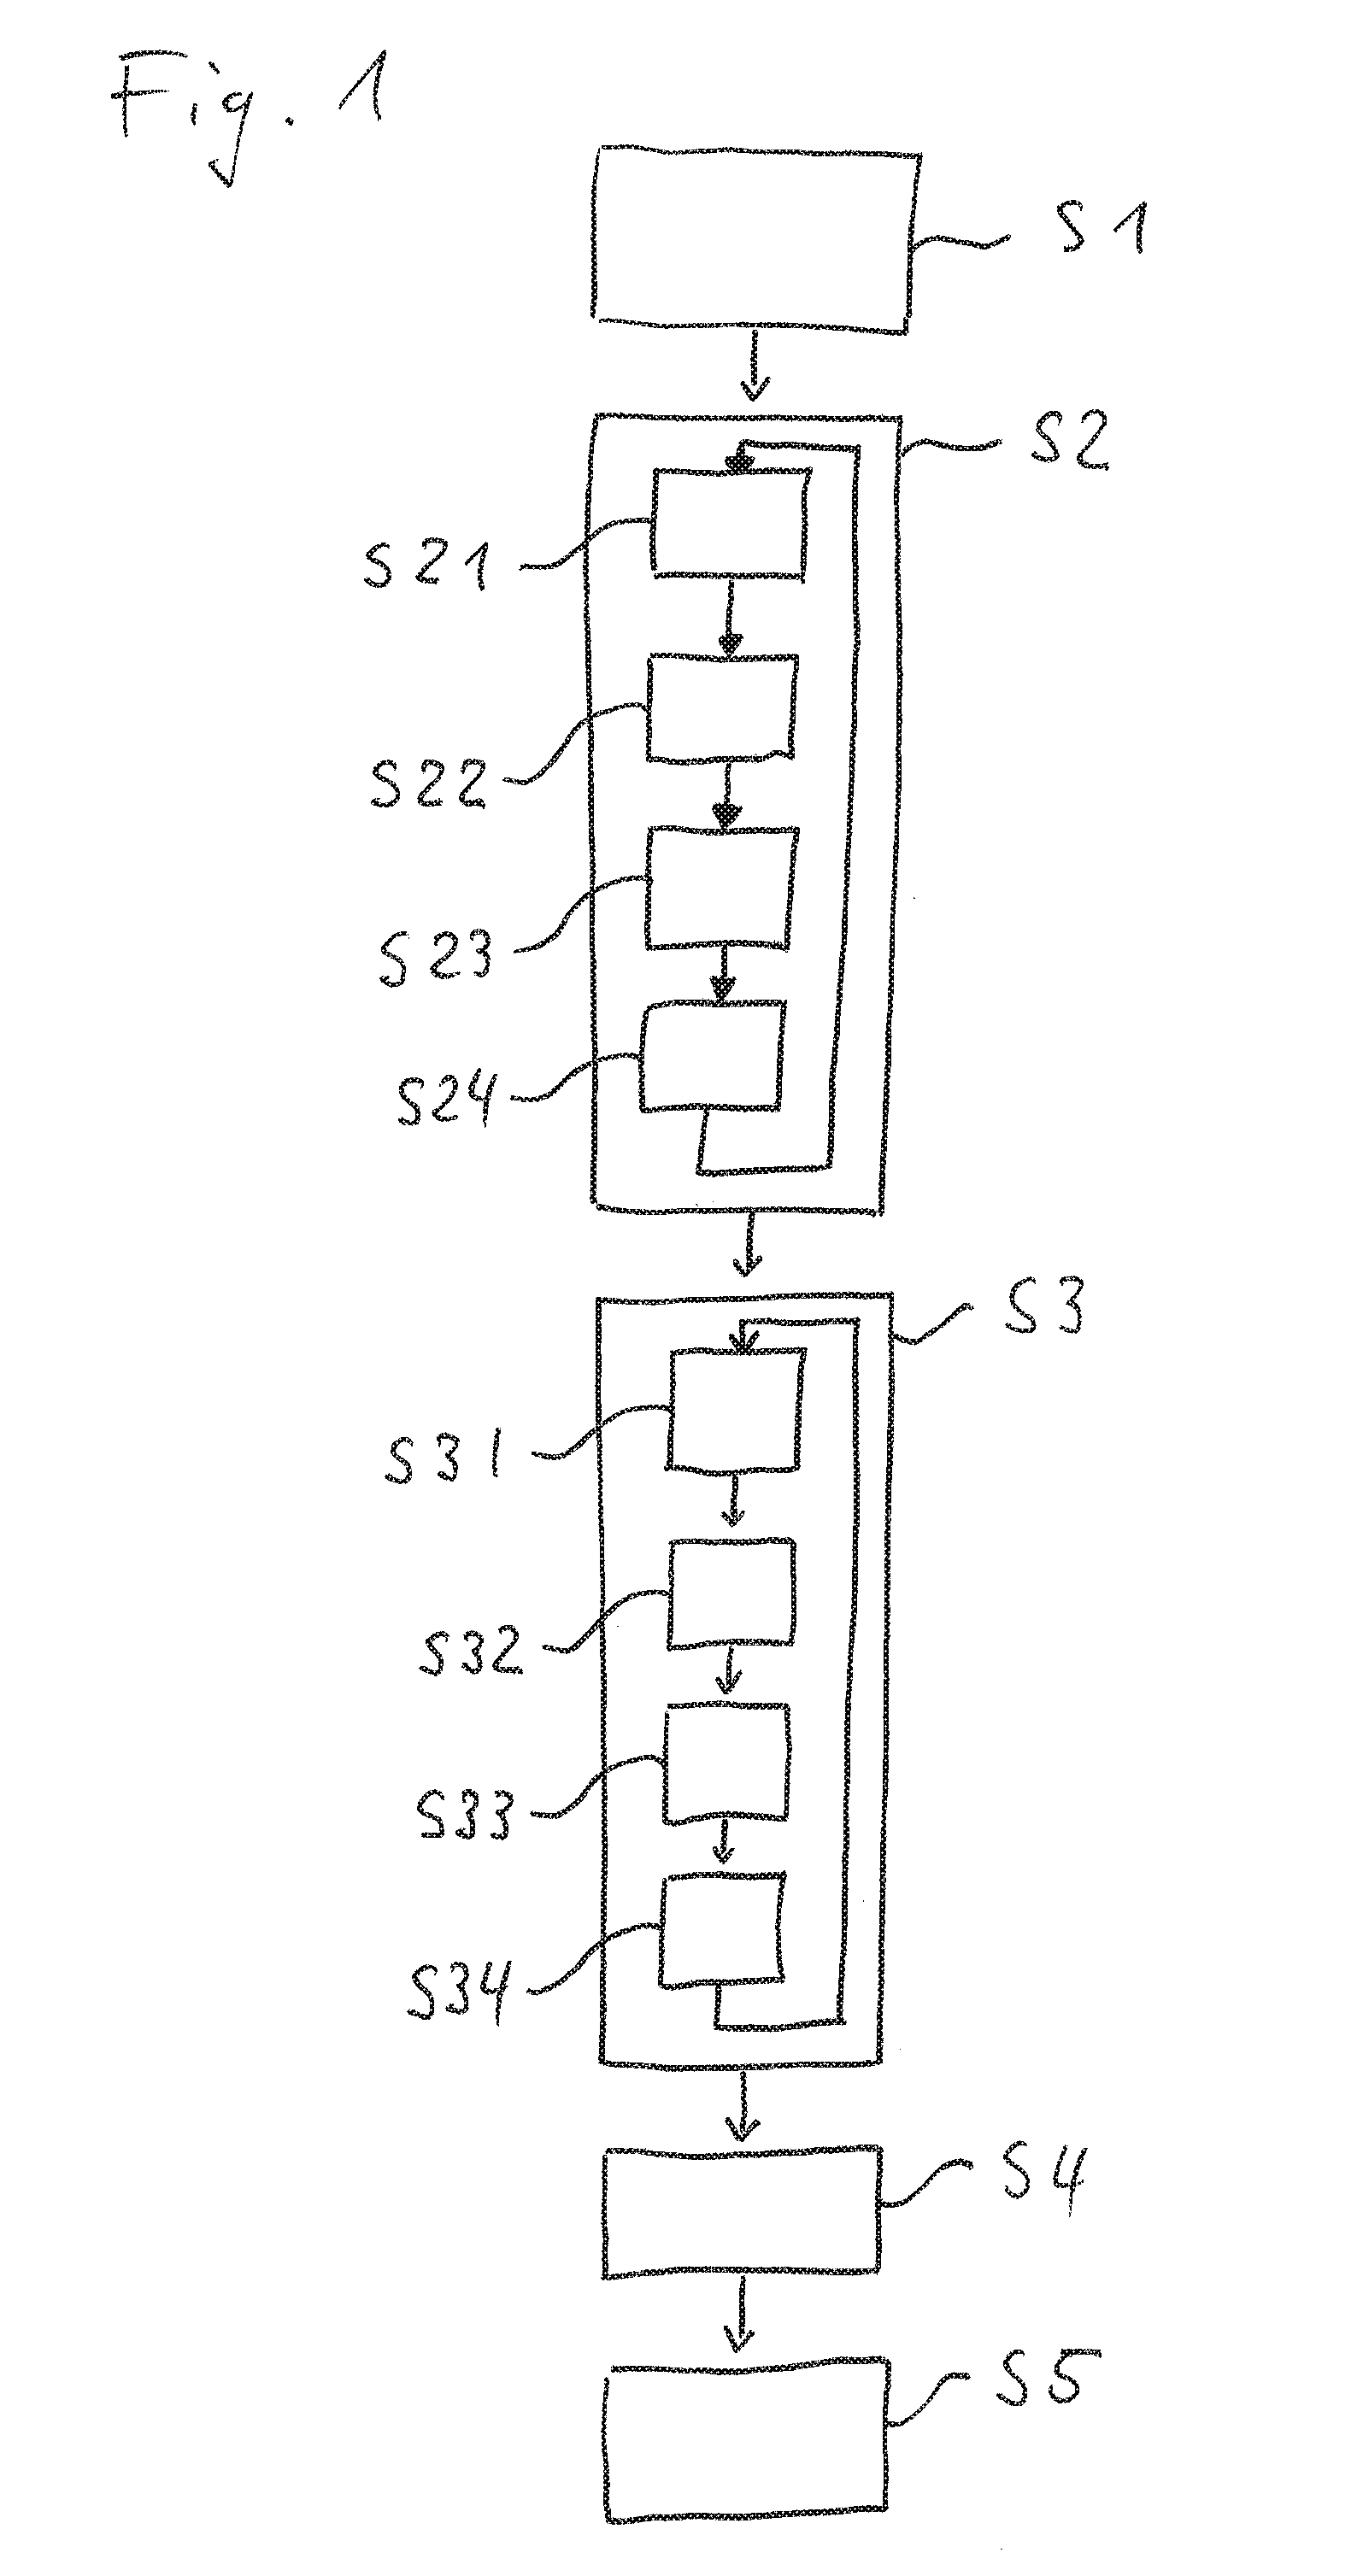 Method and apparatus for deriving a perceptual hash value from an image